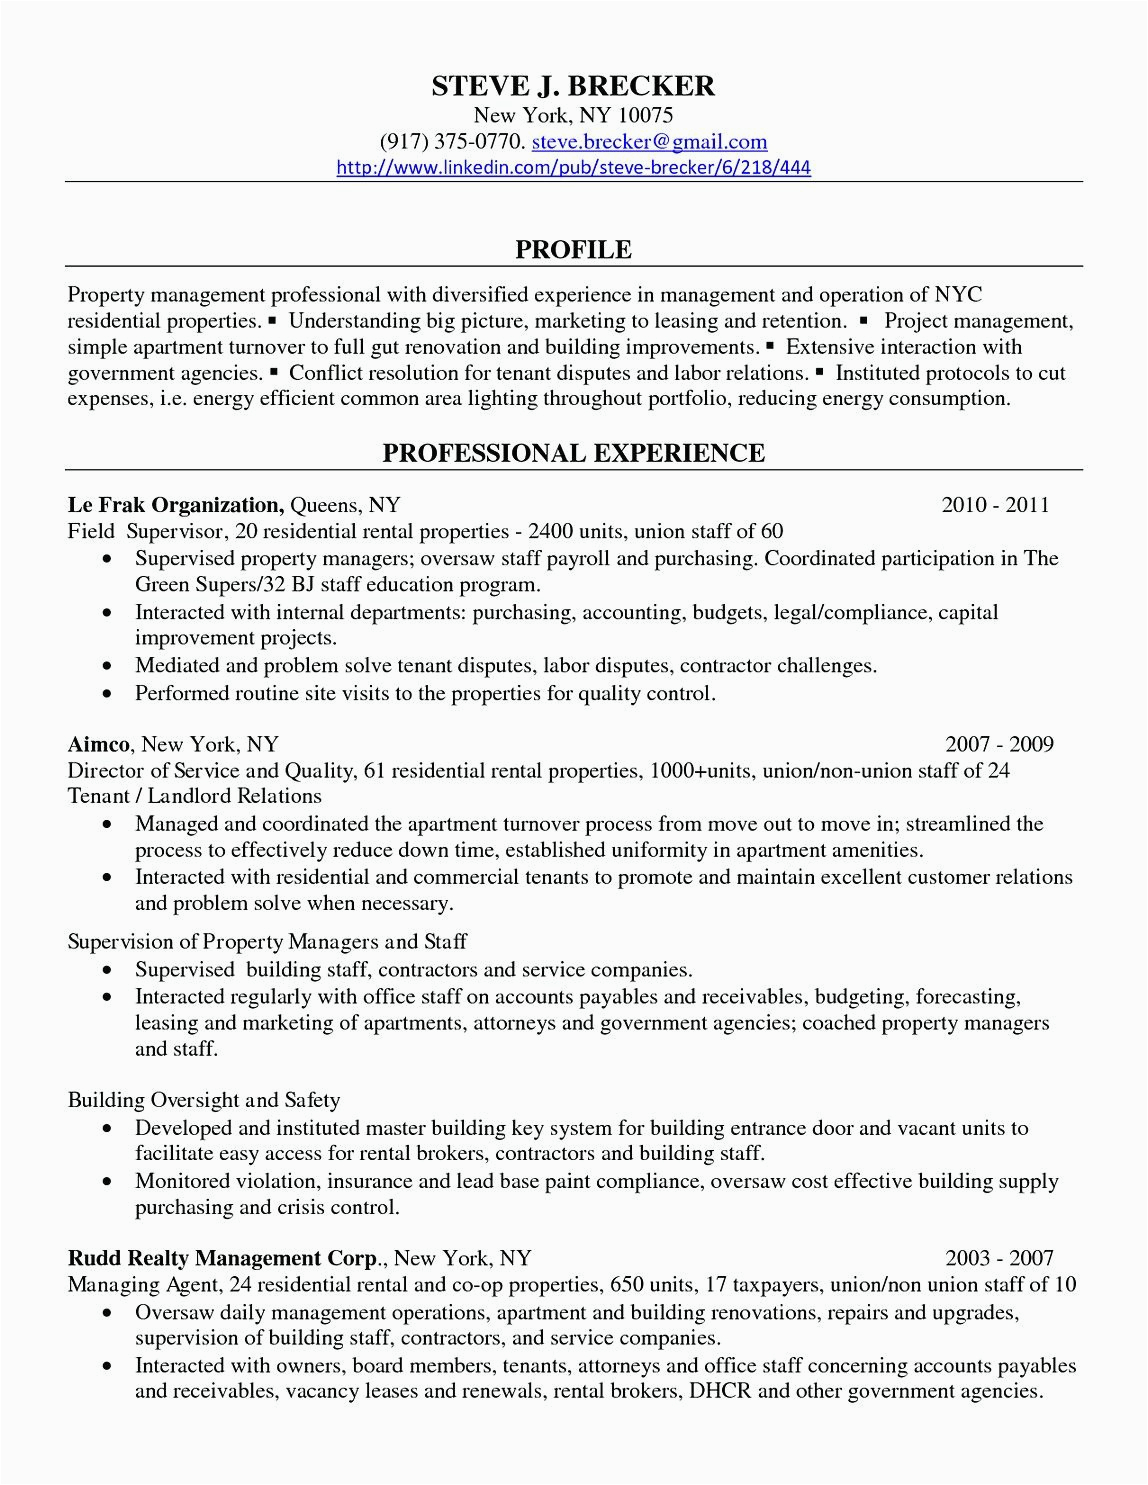 Sample Resume Objective for Property Manager Property Manager Professional Resume Samples Mercial Property